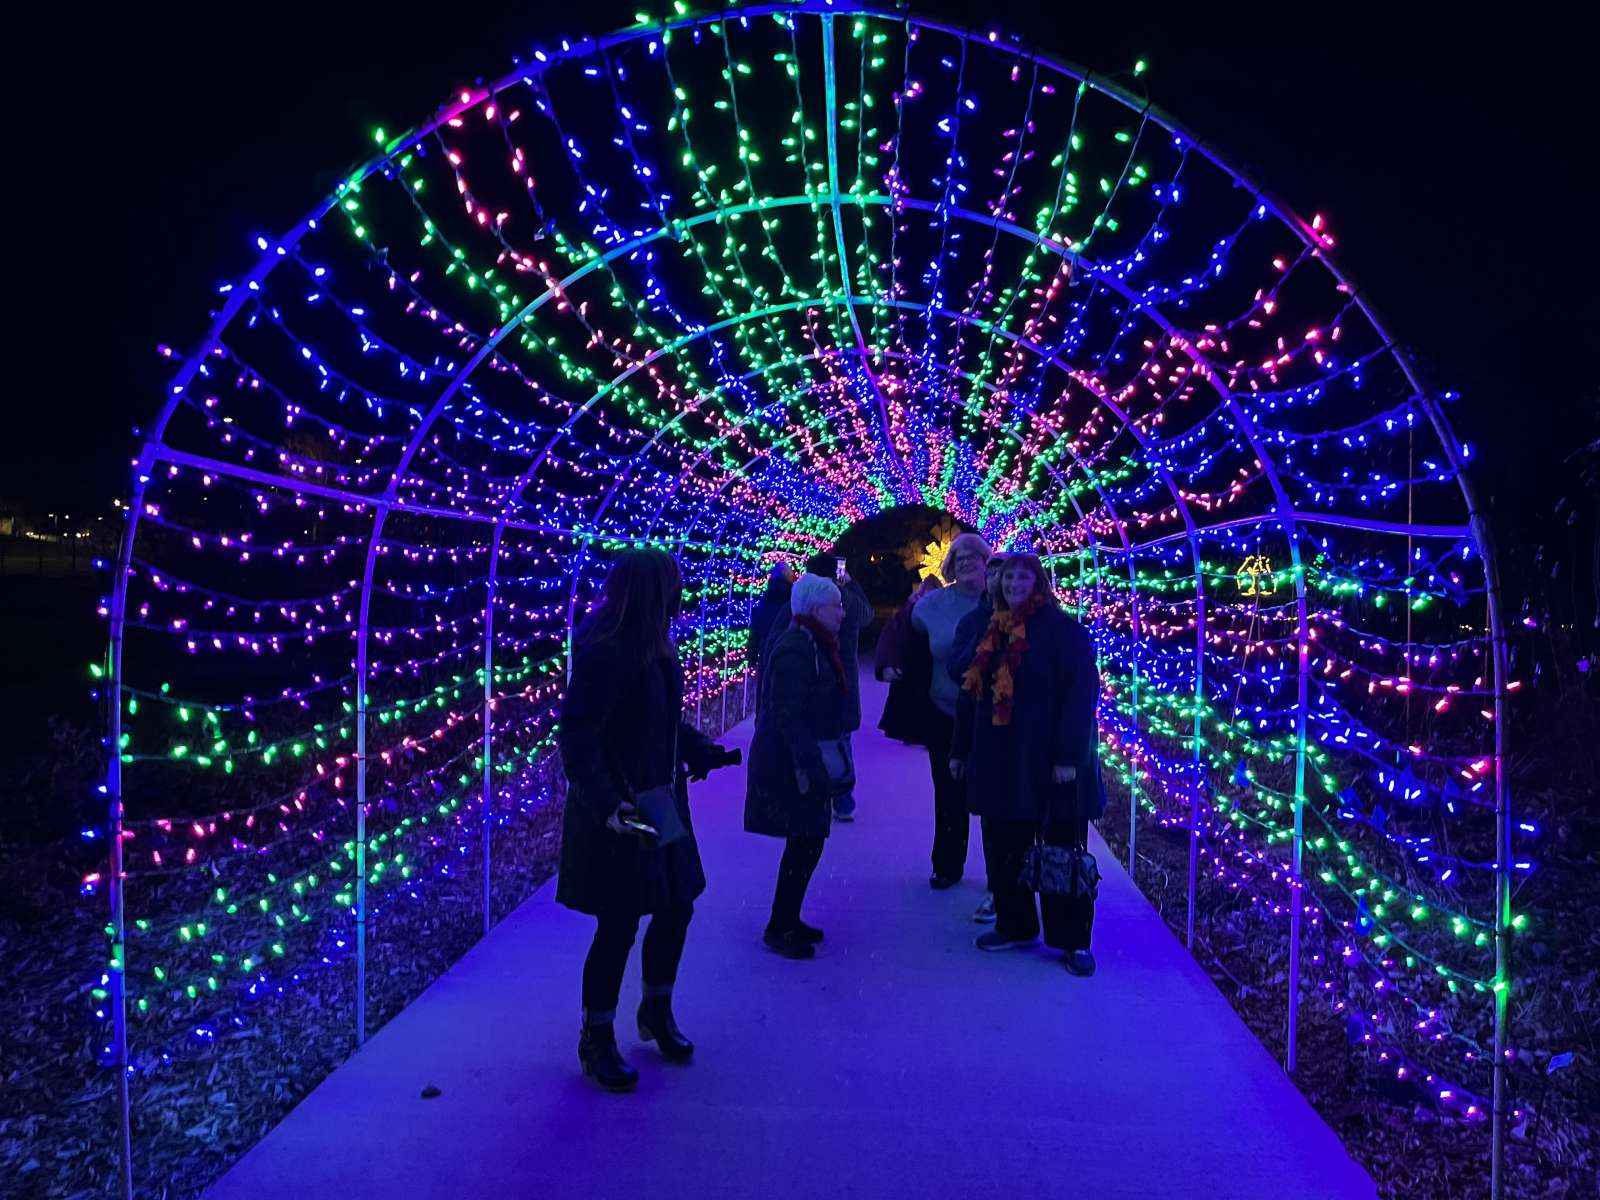 cascading tunnel of twinkling lights with people walking through